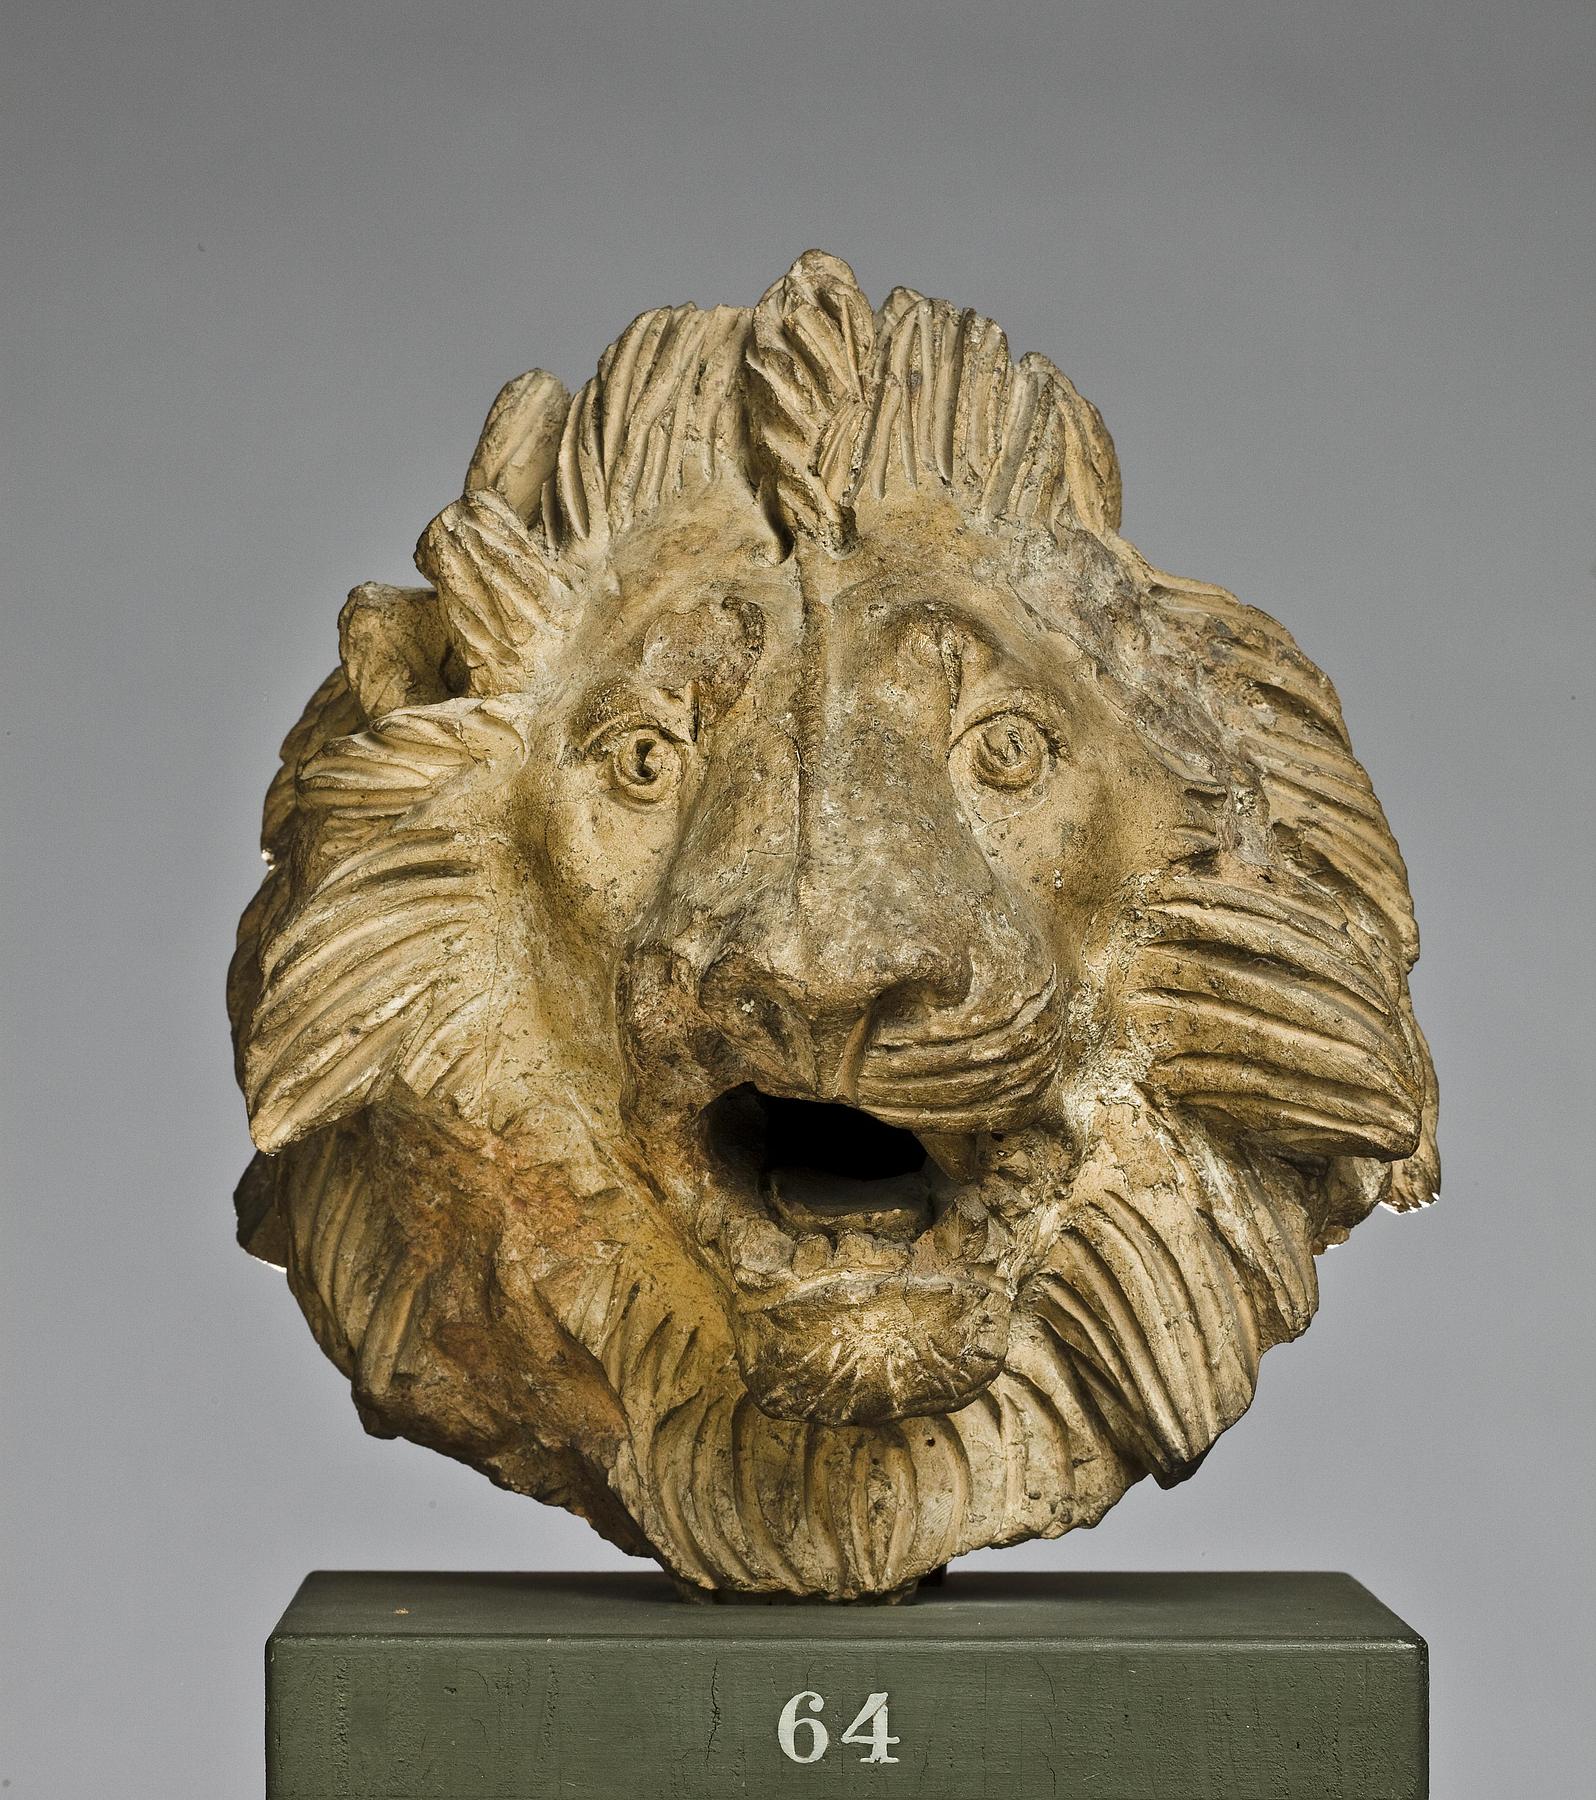 Architectural decoration in the shape of a lion's head, H1064